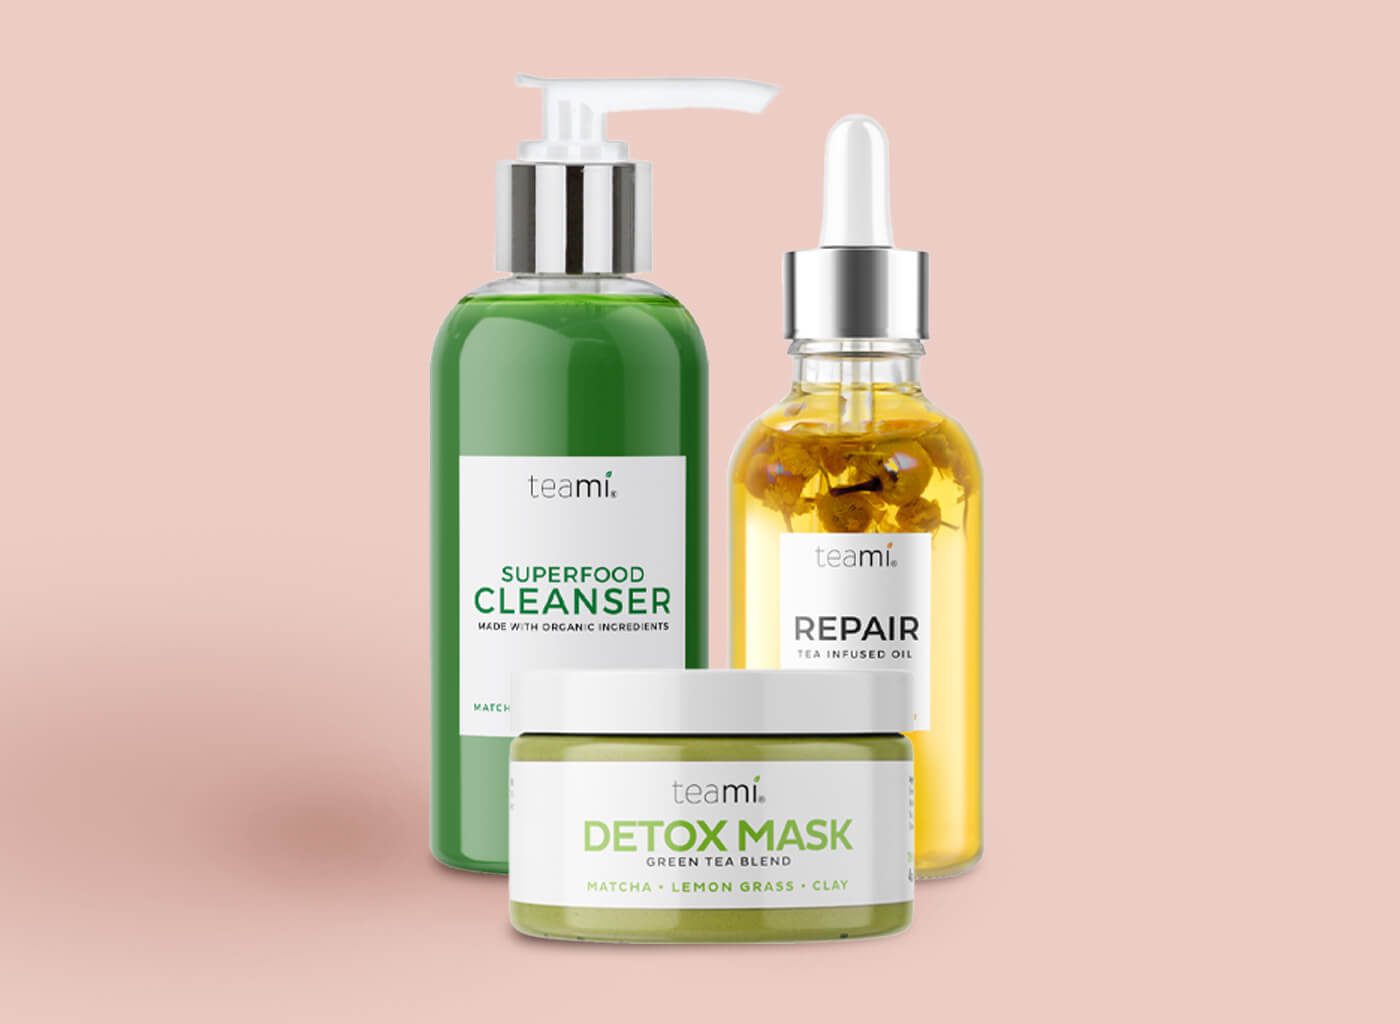 detox mask, repair oil and superfood cleanser